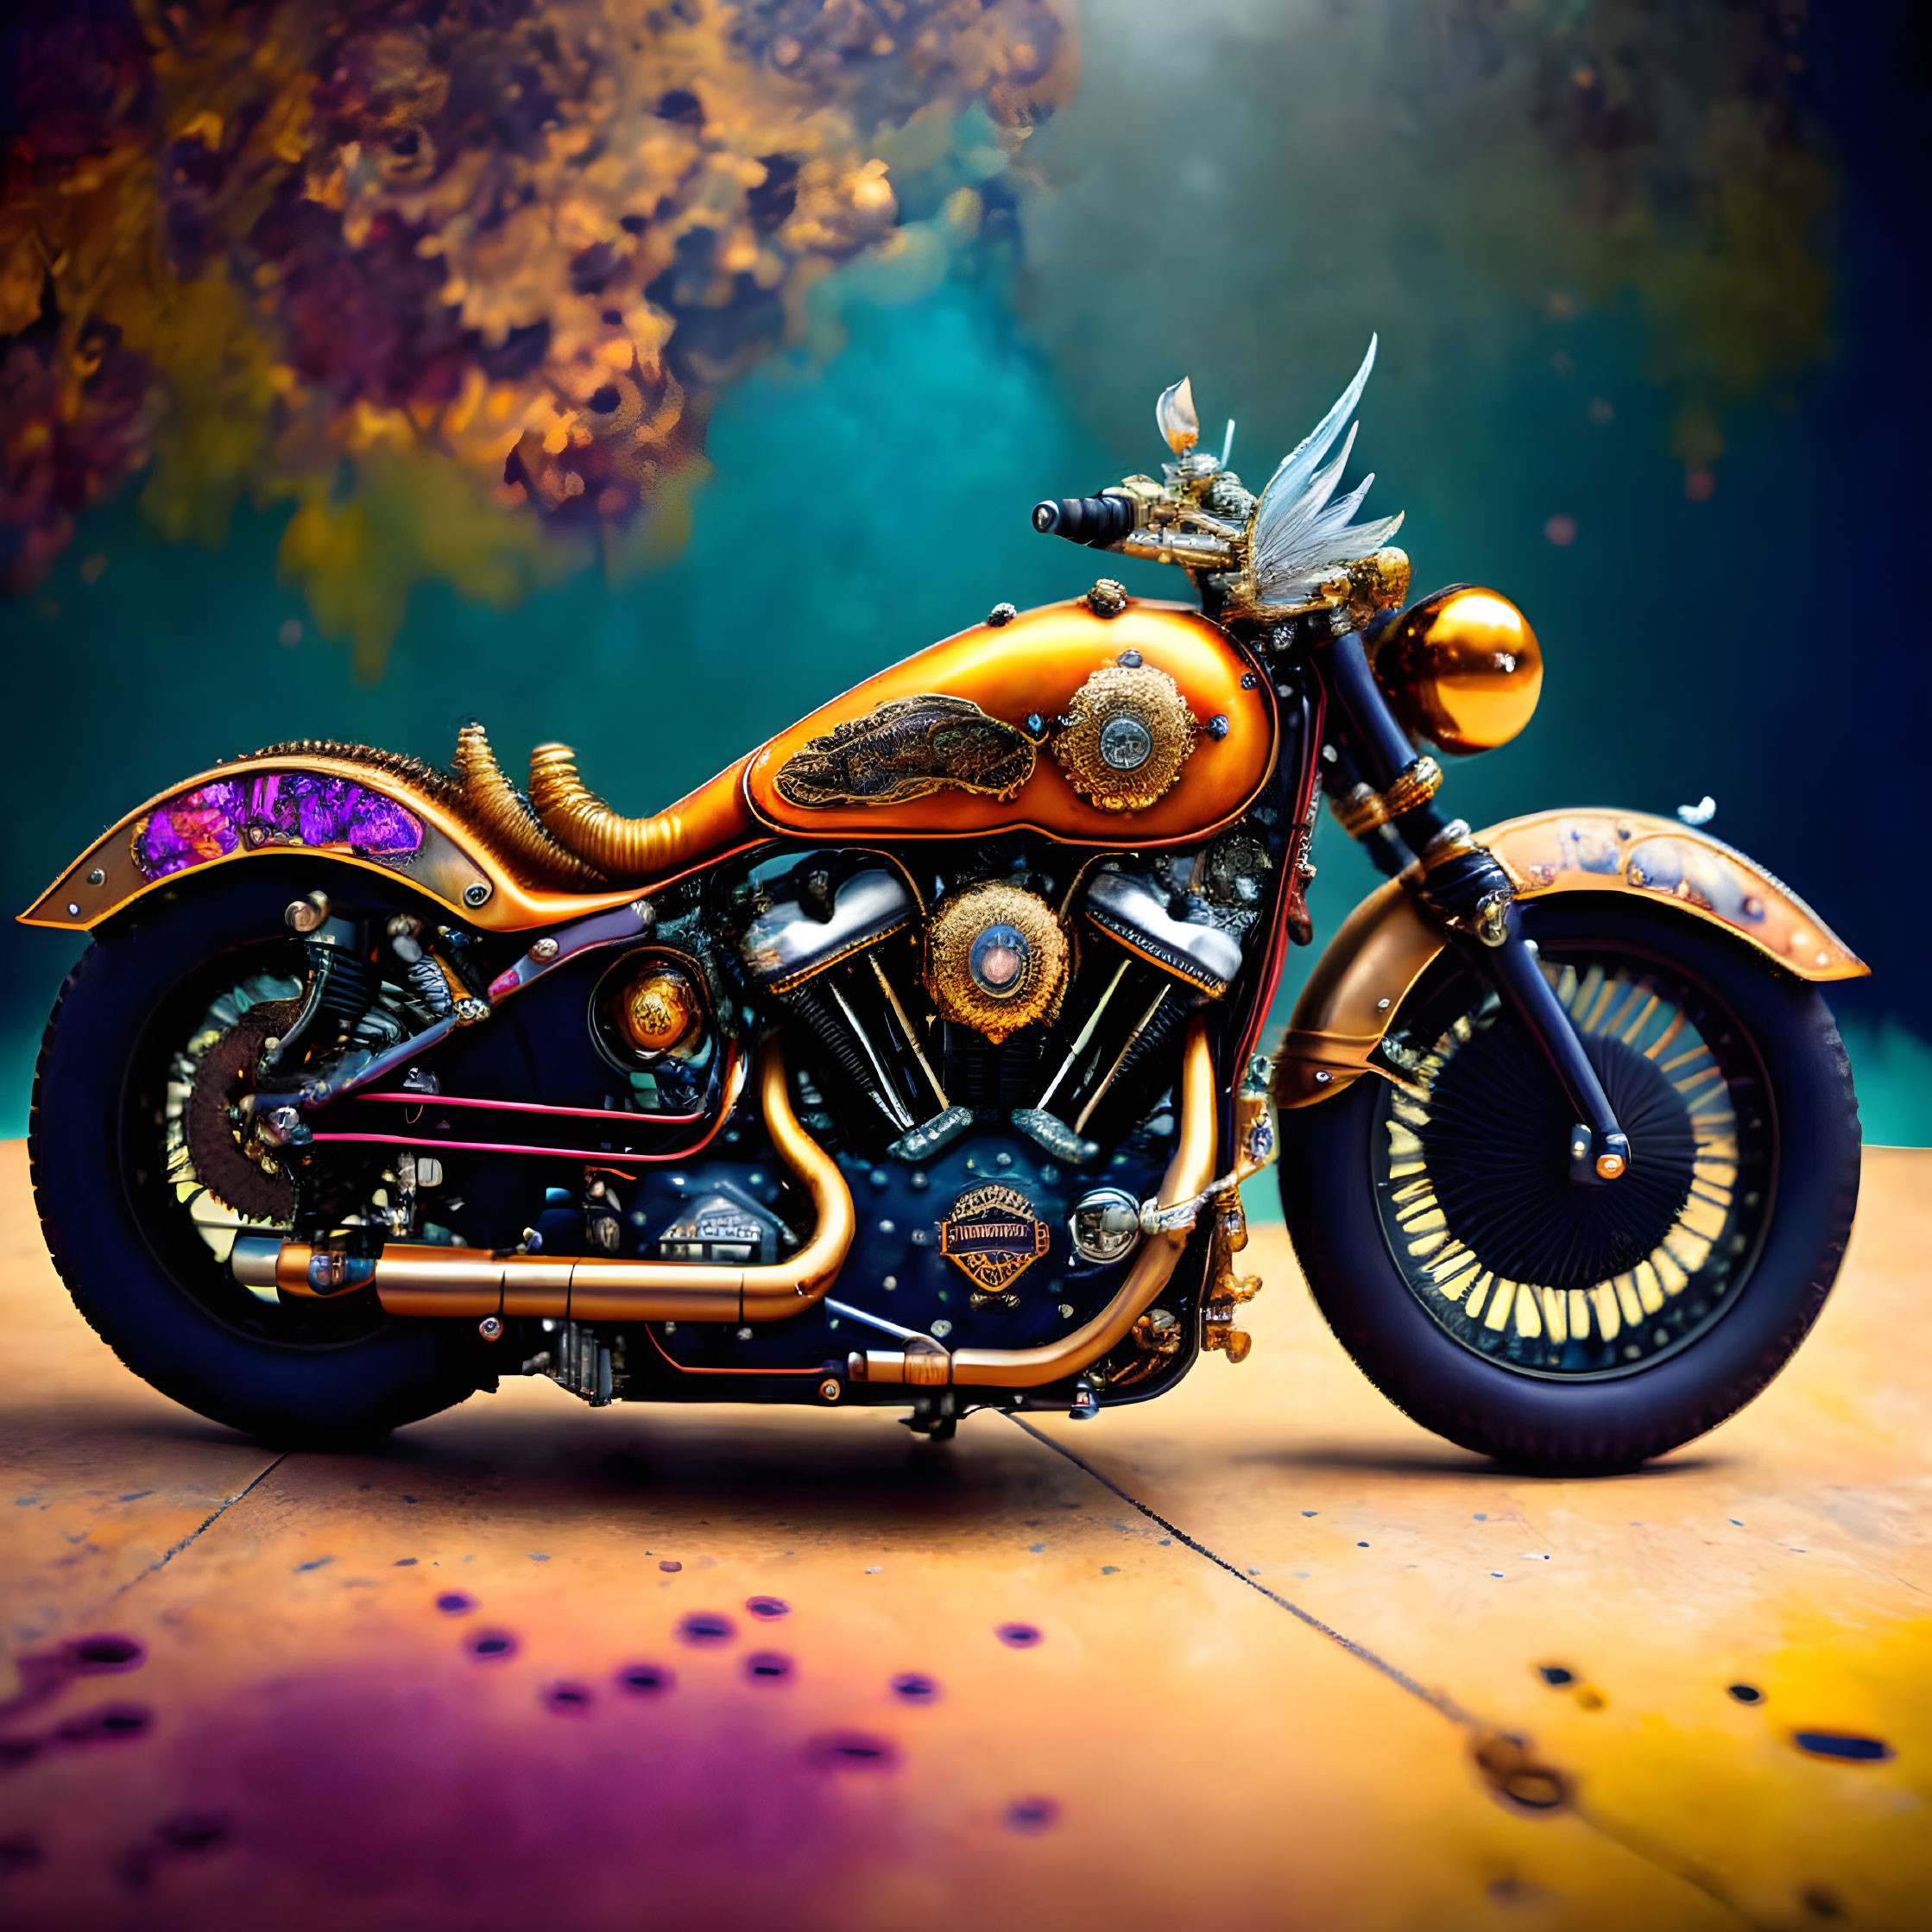 Colorful Custom Motorcycle with Violet and Gold Designs on Autumn Background